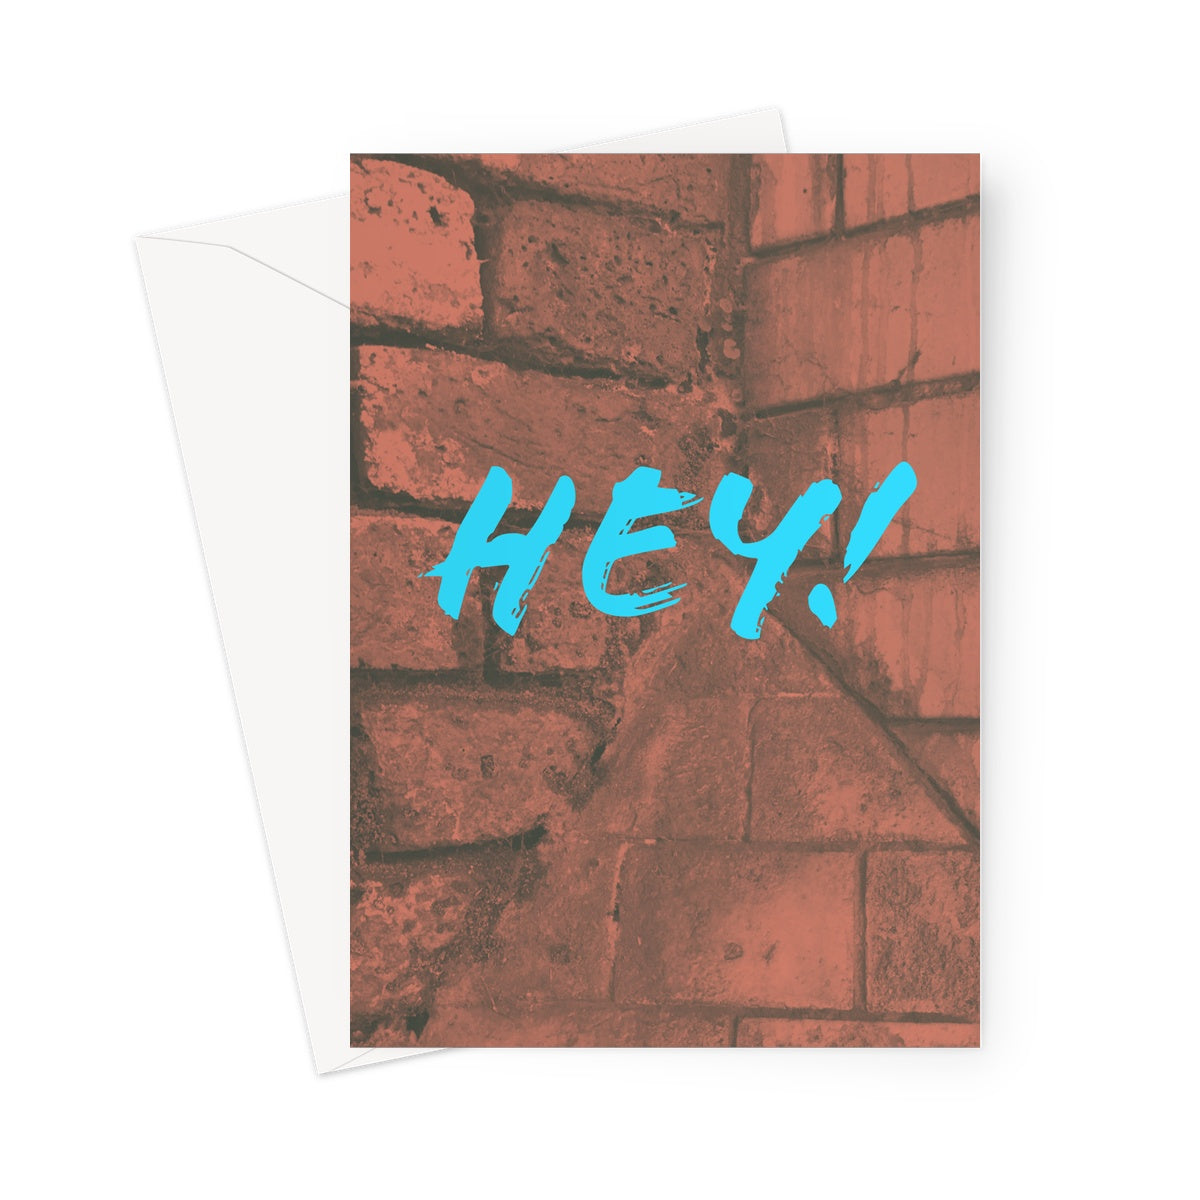 Greeting card showing the word "Hey!" in bright blue against a red-washed image of old brick and tile work from urban Southwark